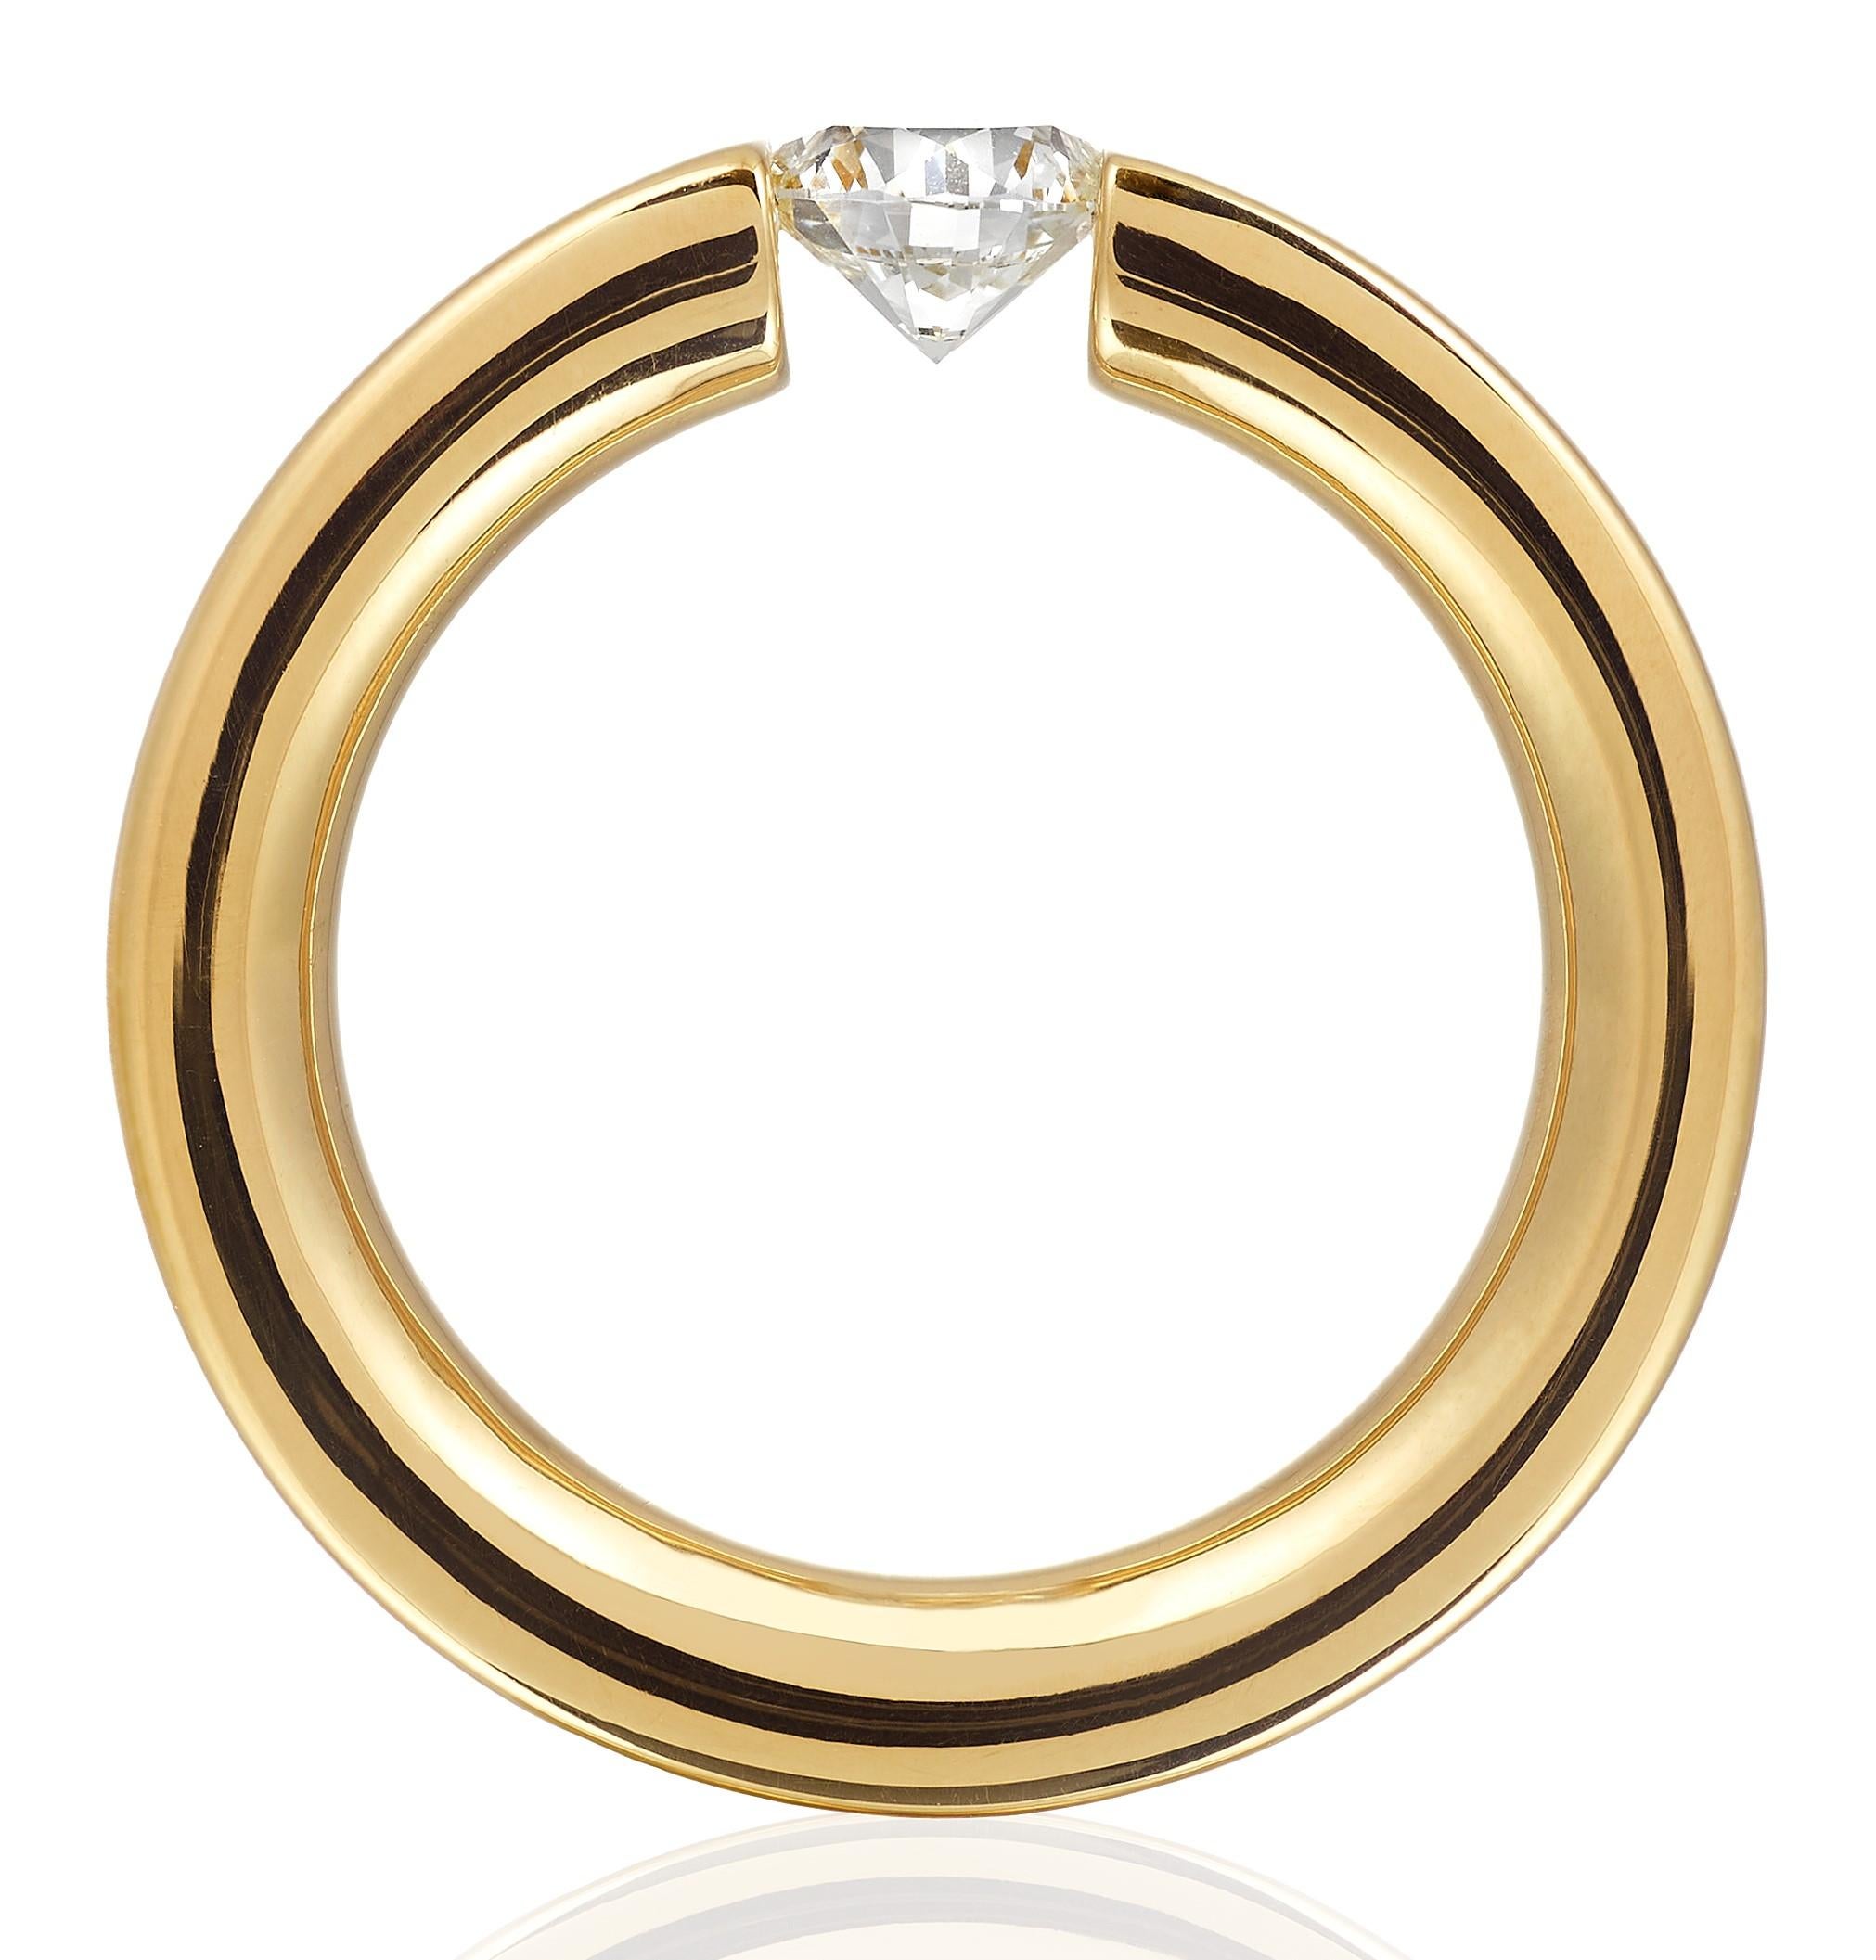 Contemporary Tension Set Diamond Ring set in Yellow Gold